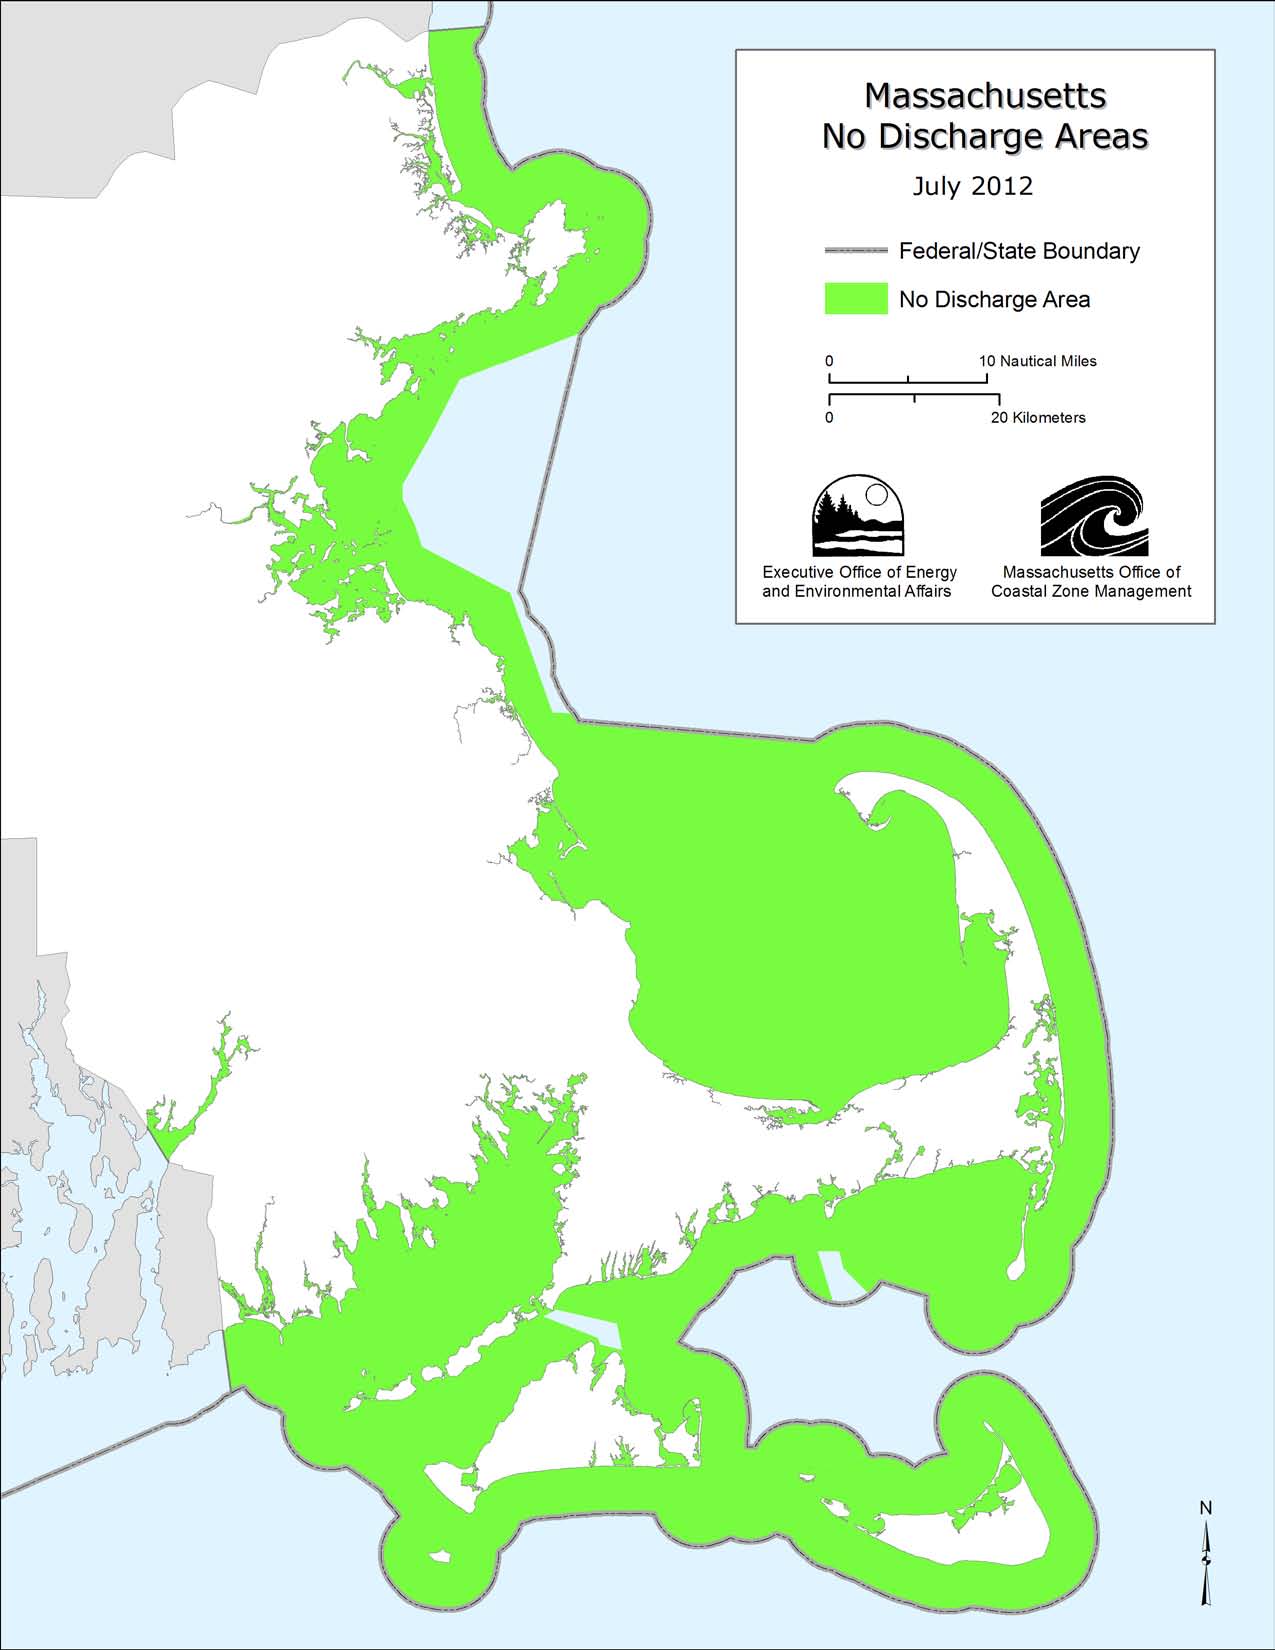 Image of a map of Massachusetts no discharge zones